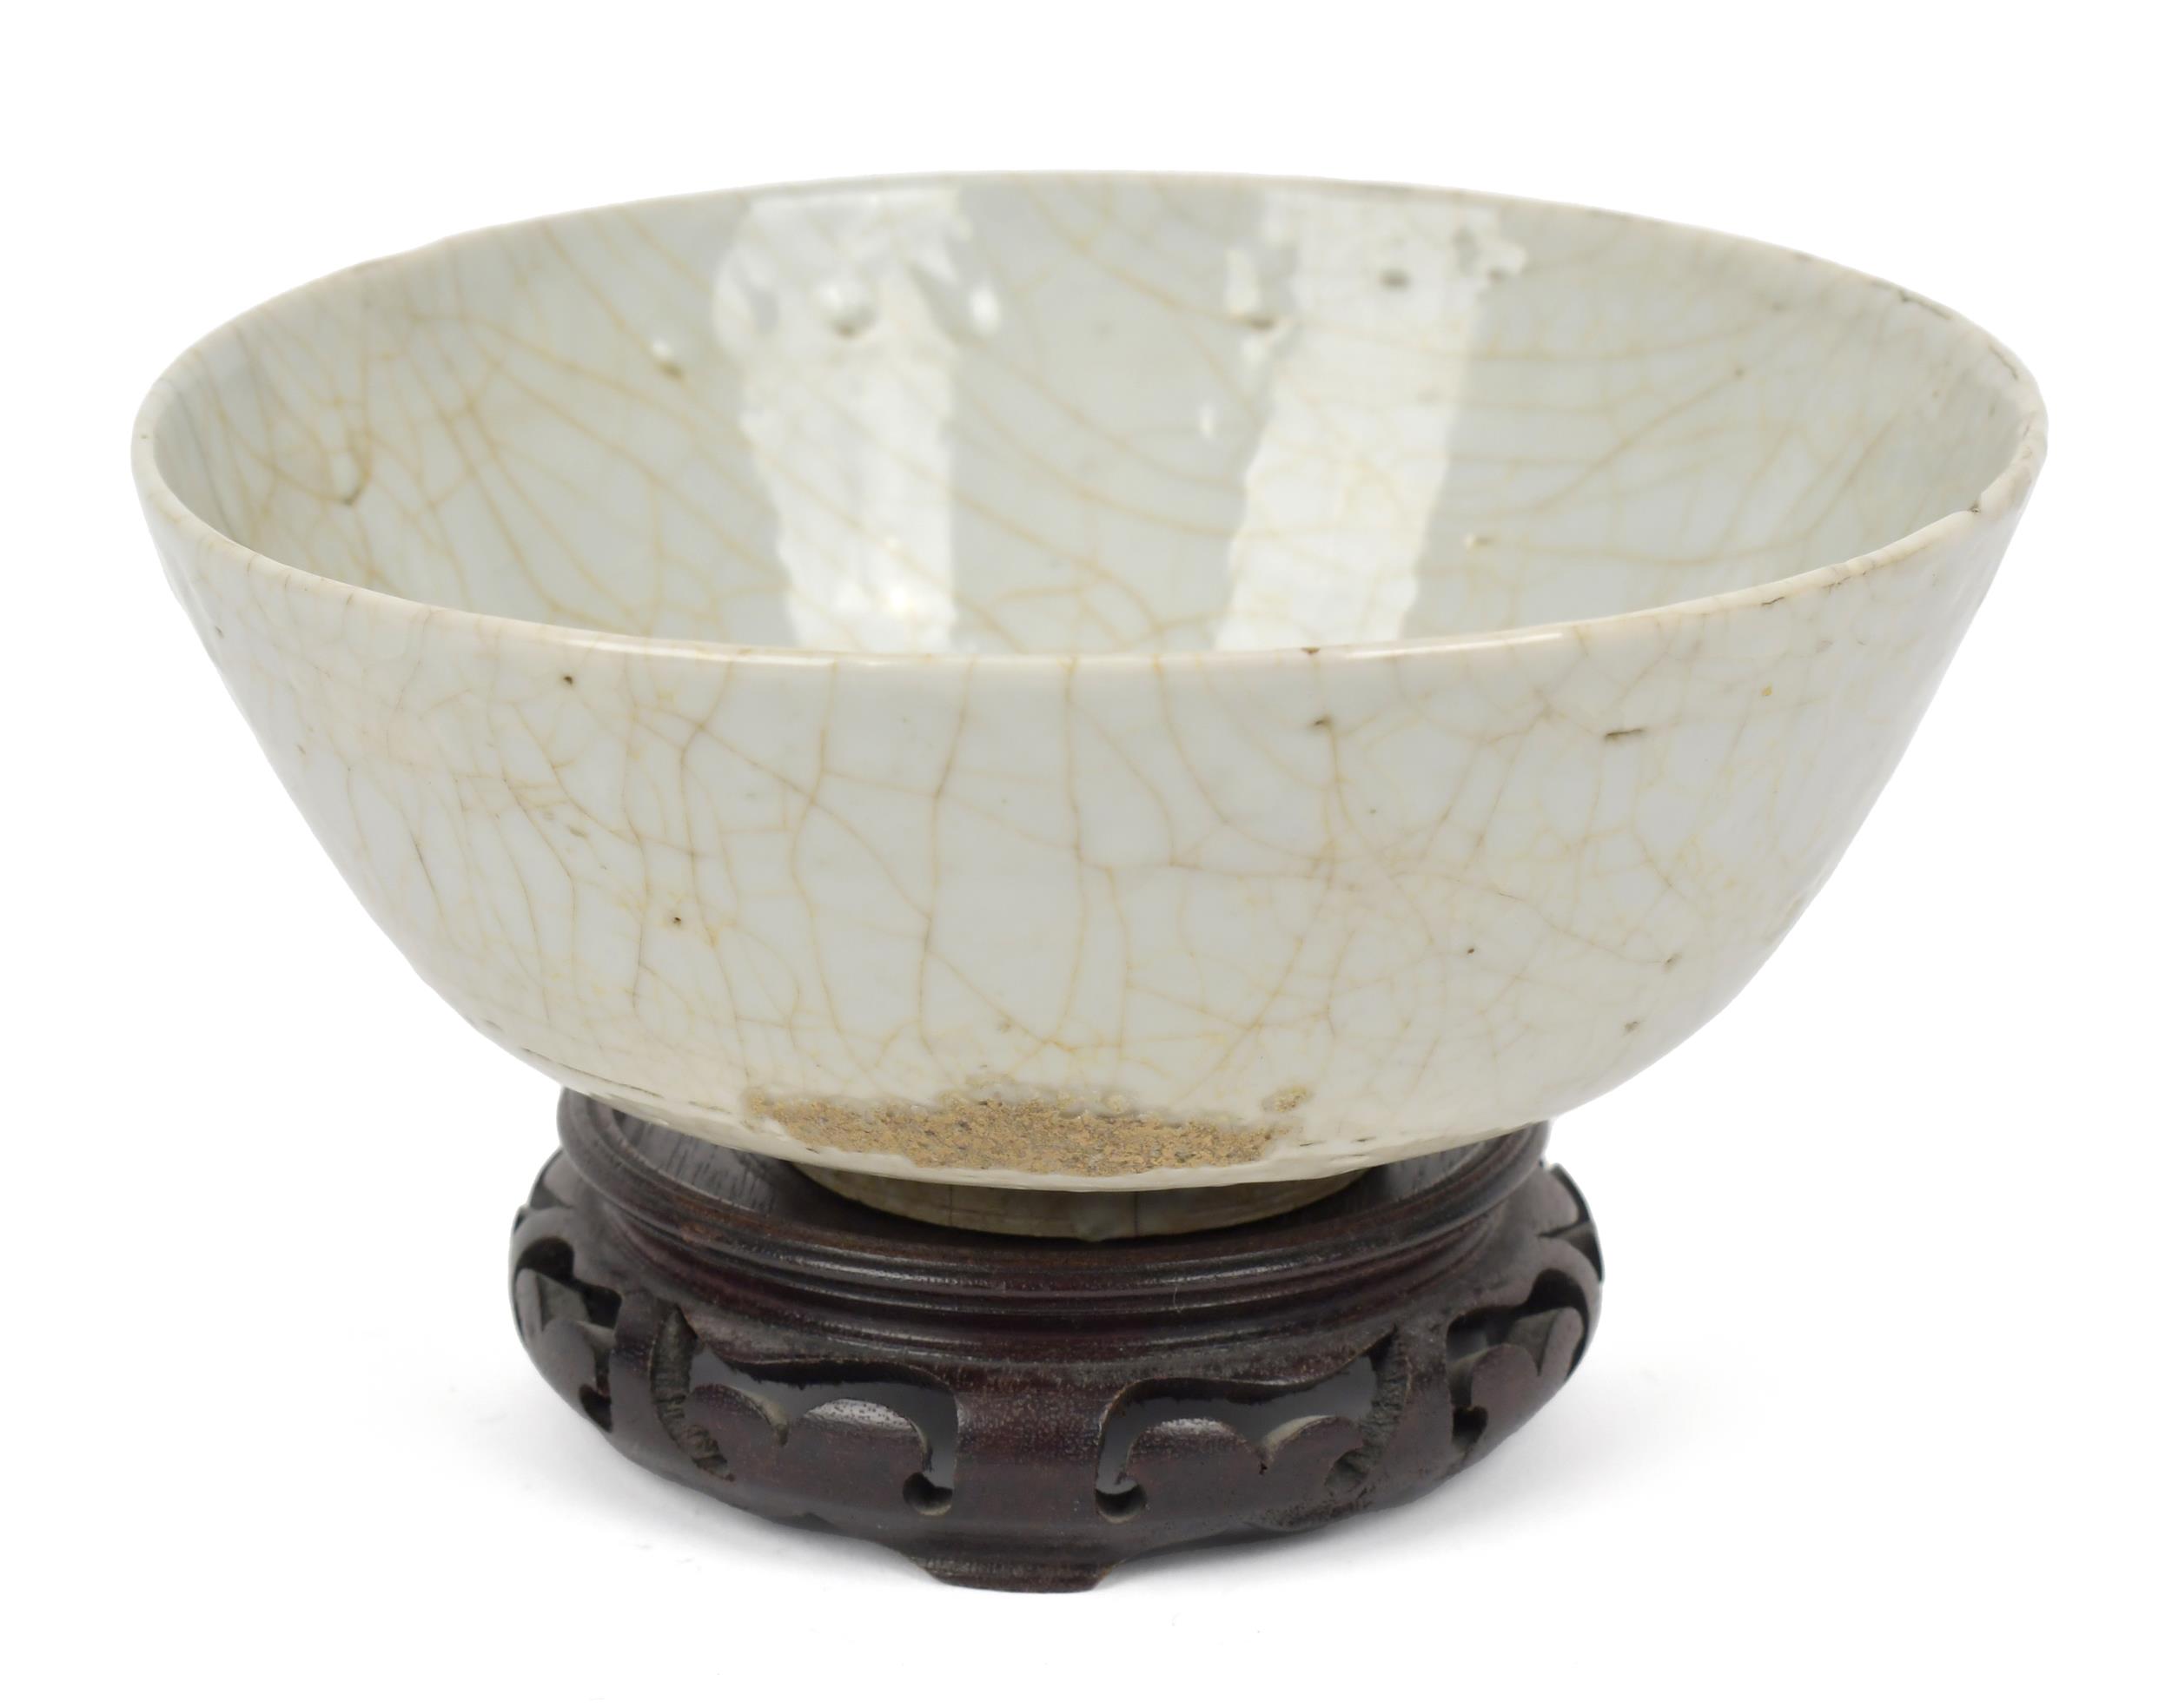 EARLY CHINESE CELADON BOWL. An